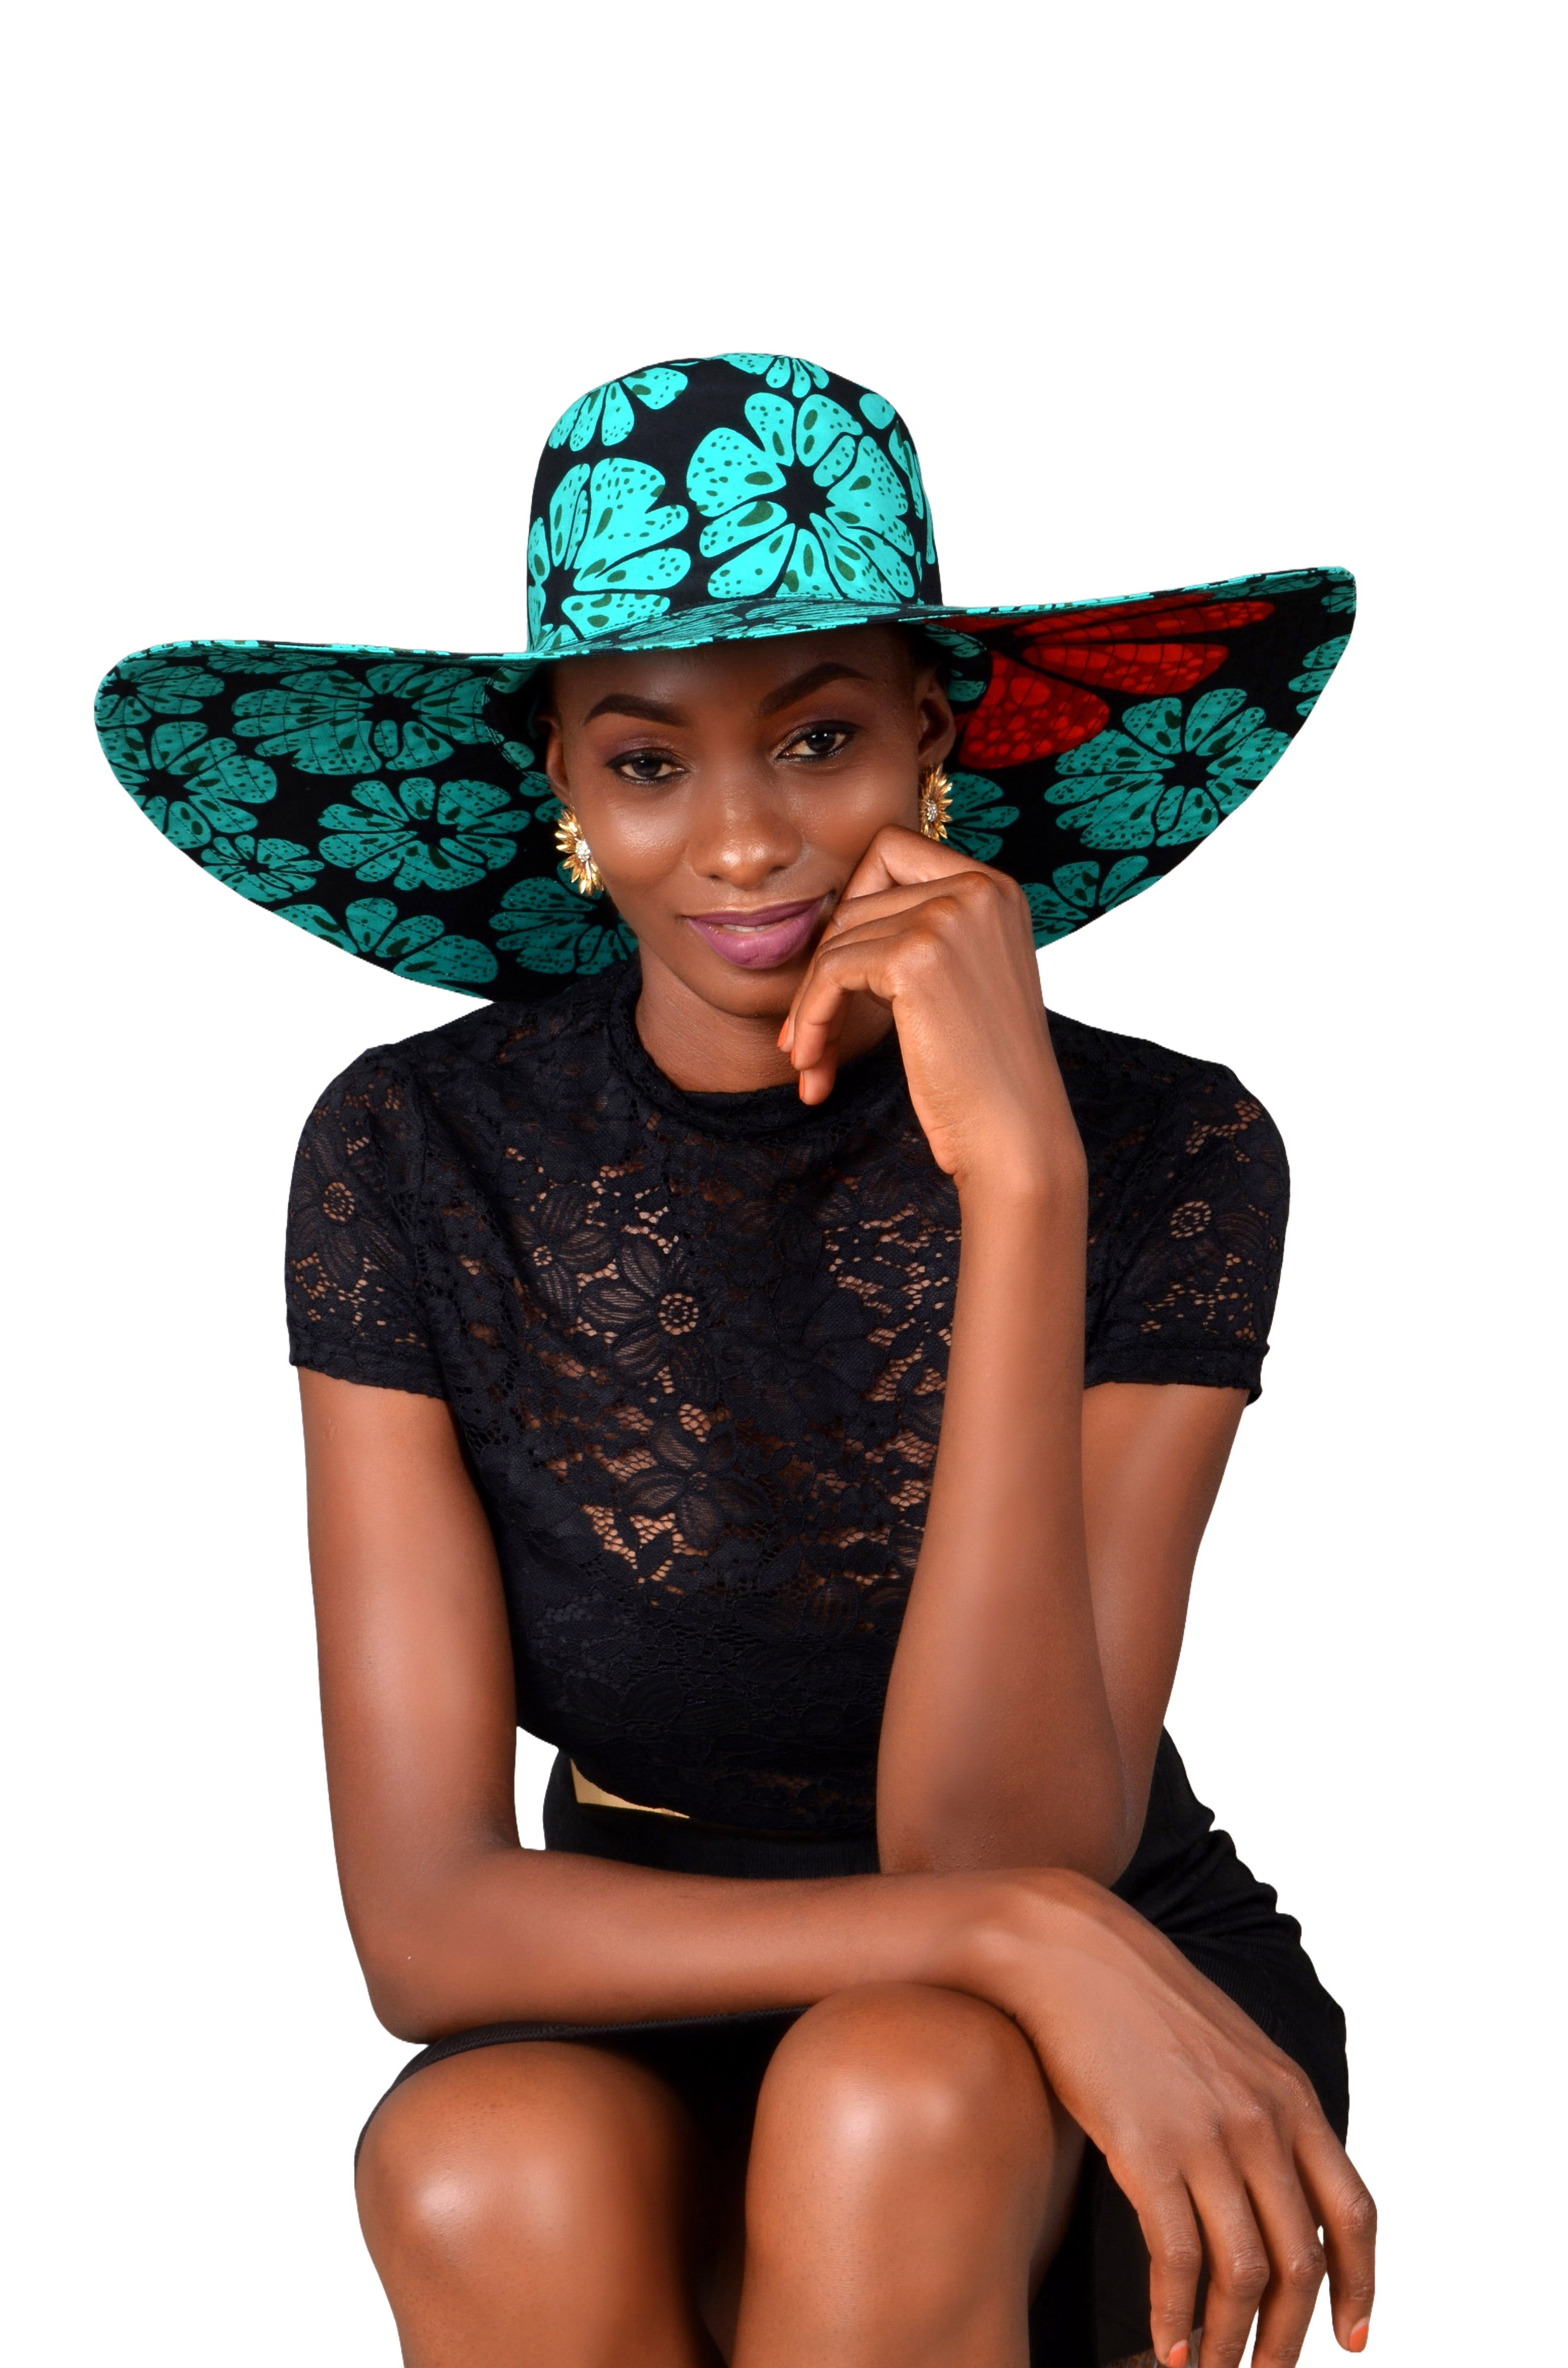 Jollo Alizeti Modern African Hat: let comfort and style give you the best shade